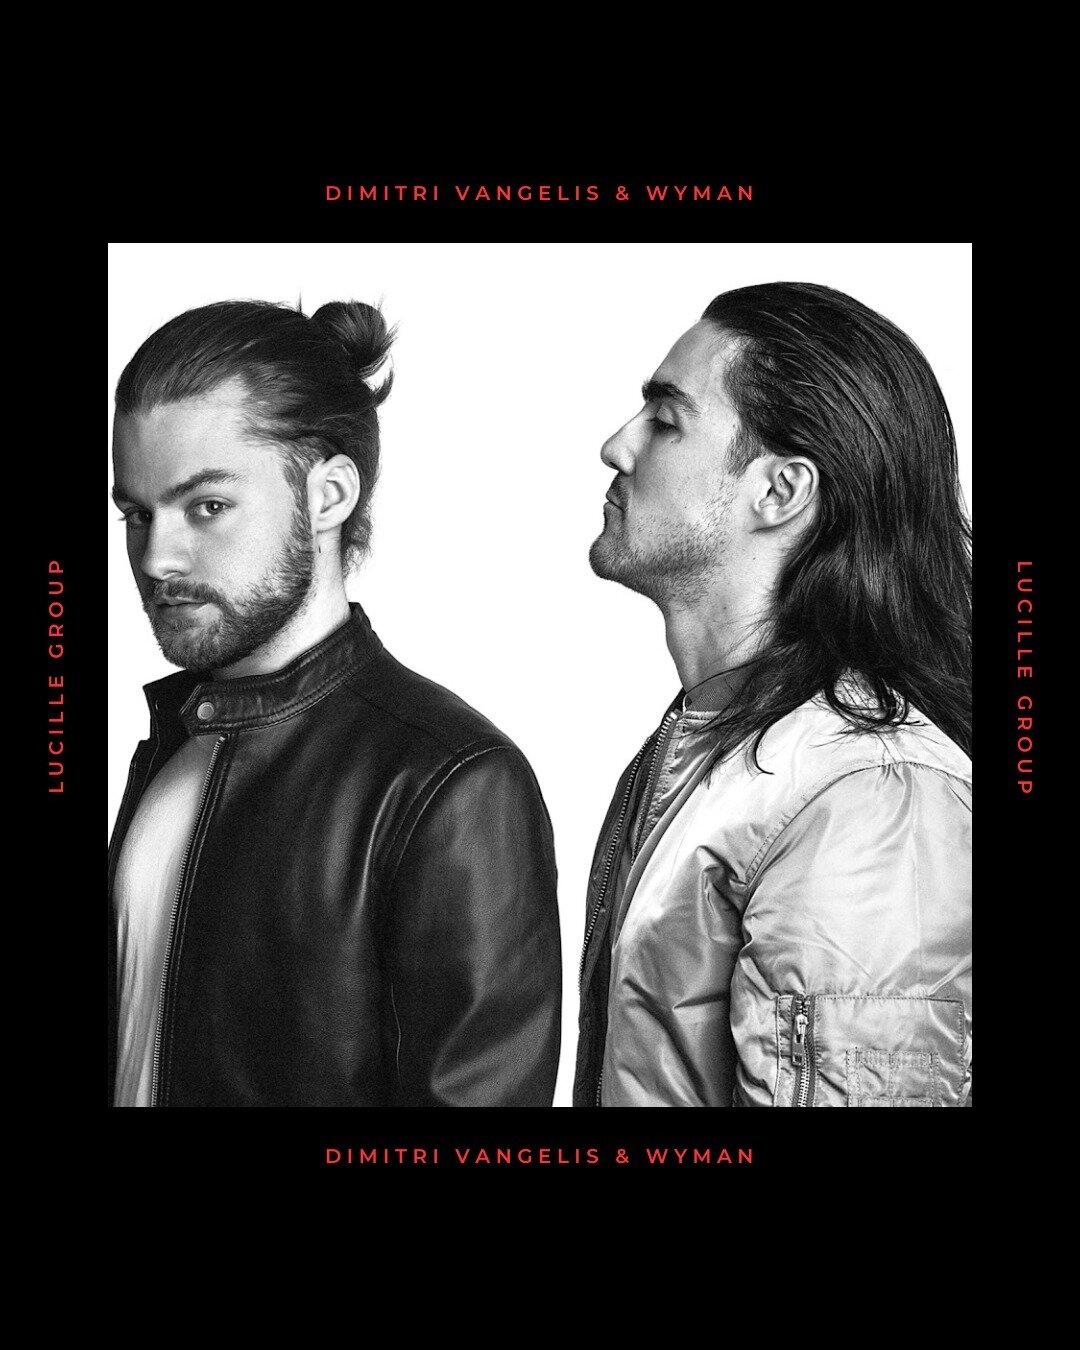 Dimitri Vangelis &amp; Wyman are a Swedish DJ and producer duo who have played an important role in the progressive house and EDM scene worldwide. With their creativity and distinctive sound, they push the boundaries of the genre, while still staying